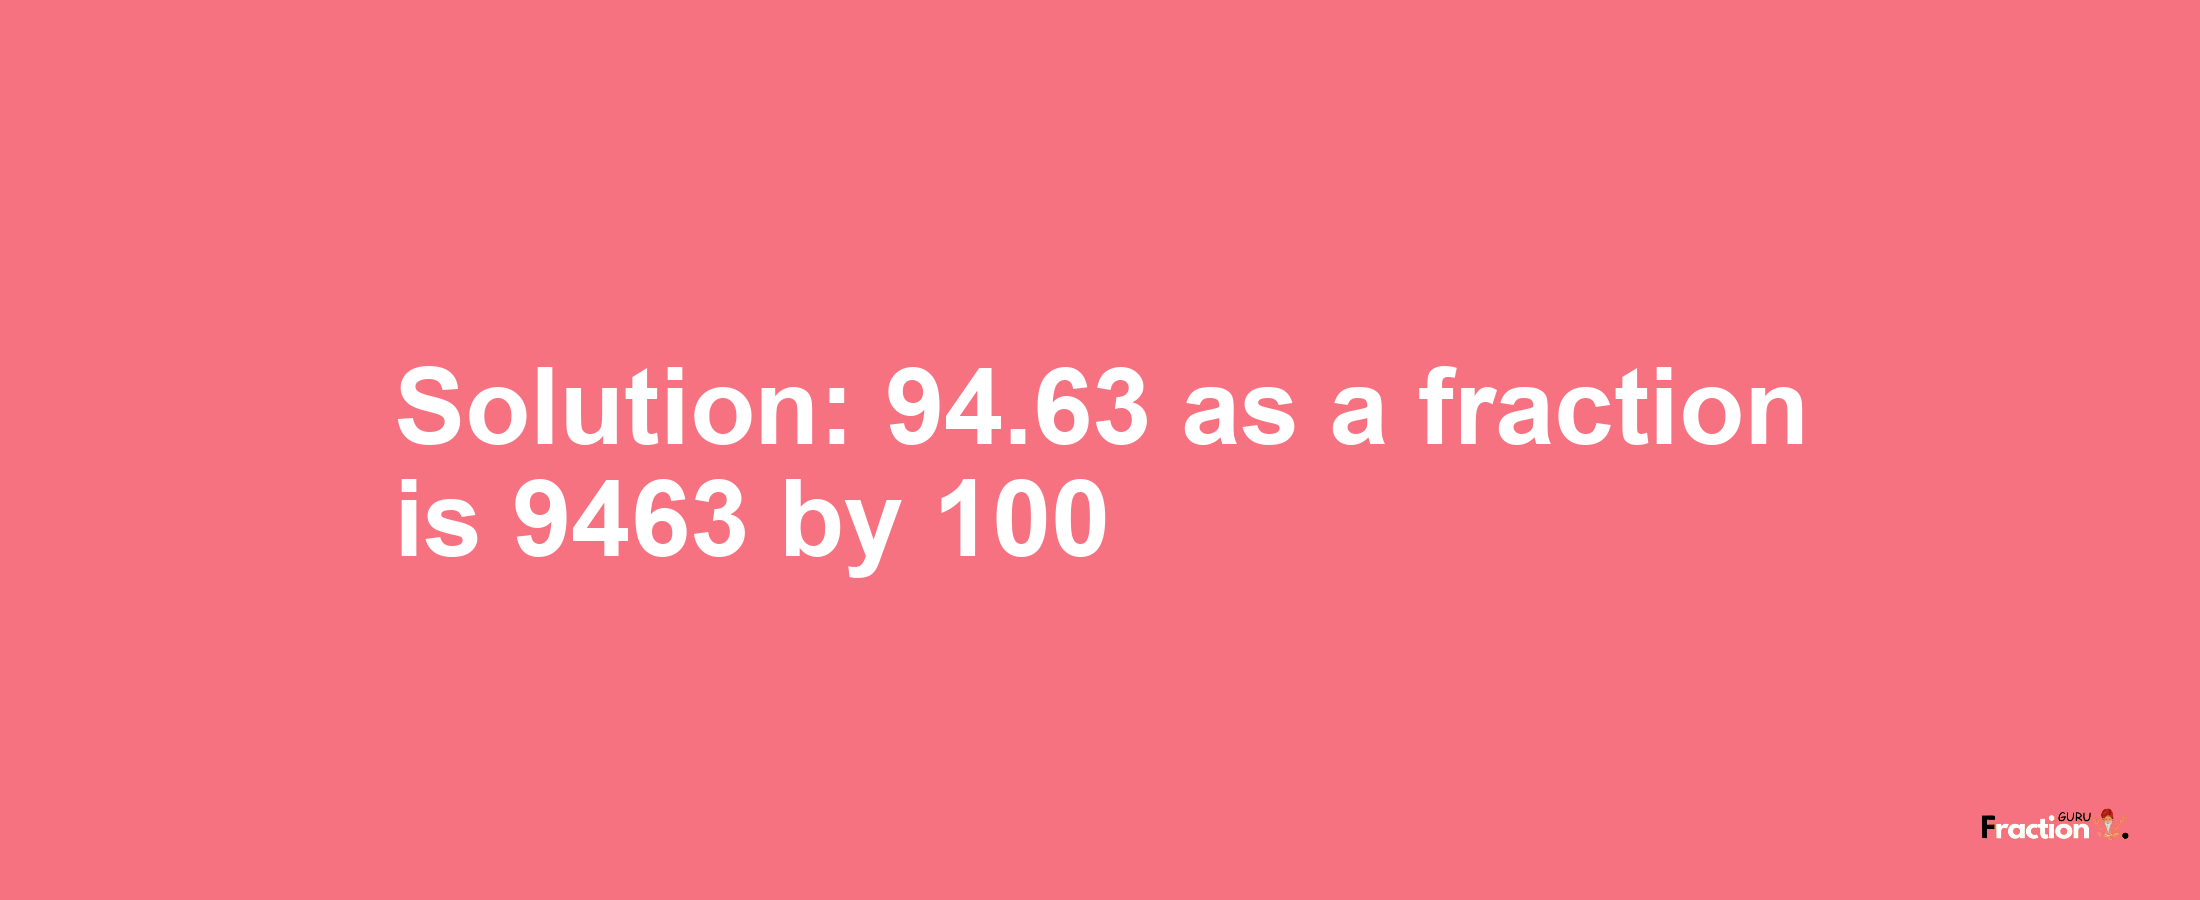 Solution:94.63 as a fraction is 9463/100